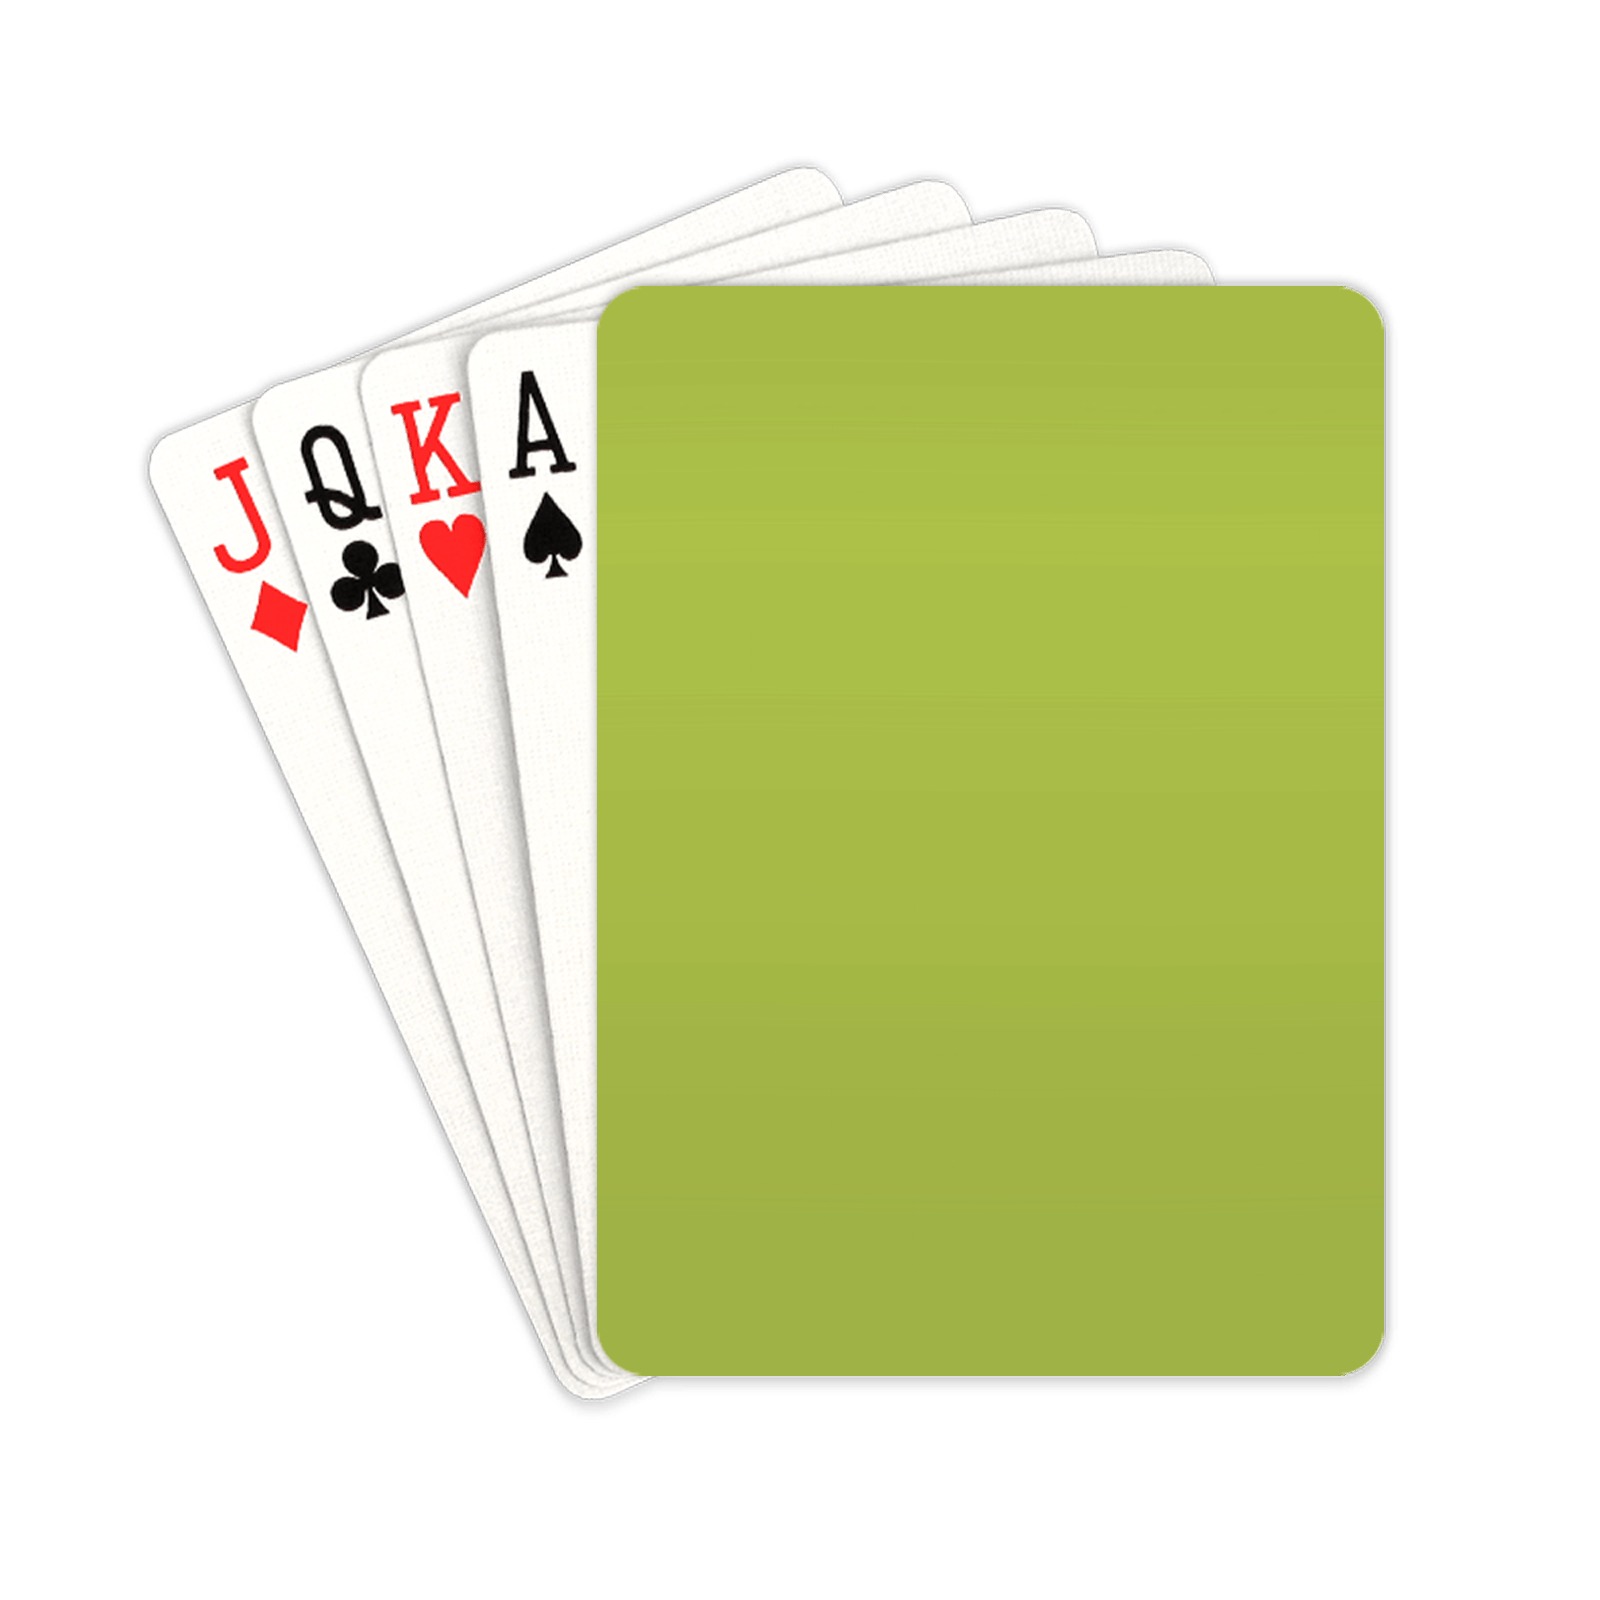 yel ow Playing Cards 2.5"x3.5"